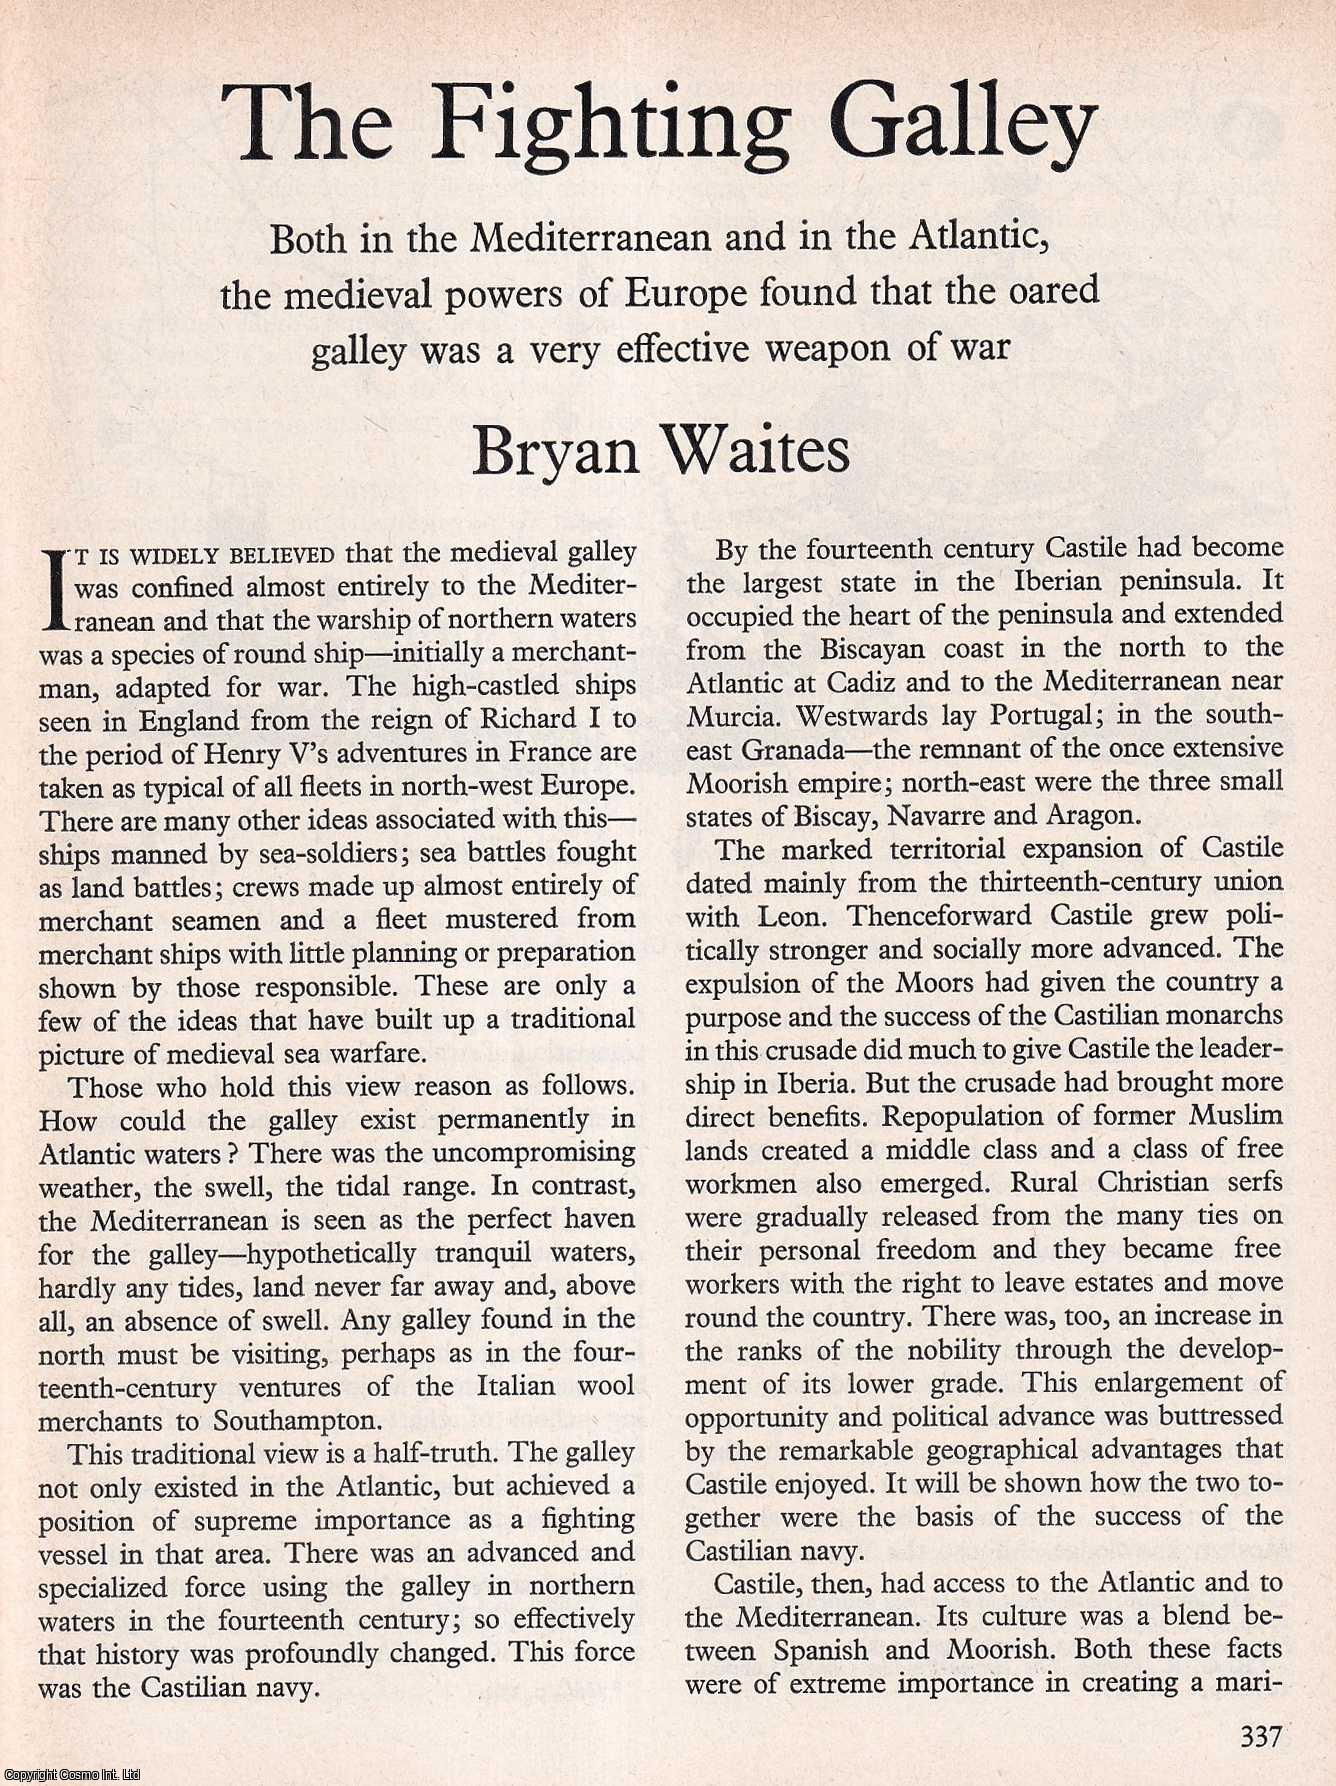 Bryan Waites - The Fighting Gallery: Weapon of War. An original article from History Today magazine, 1968.